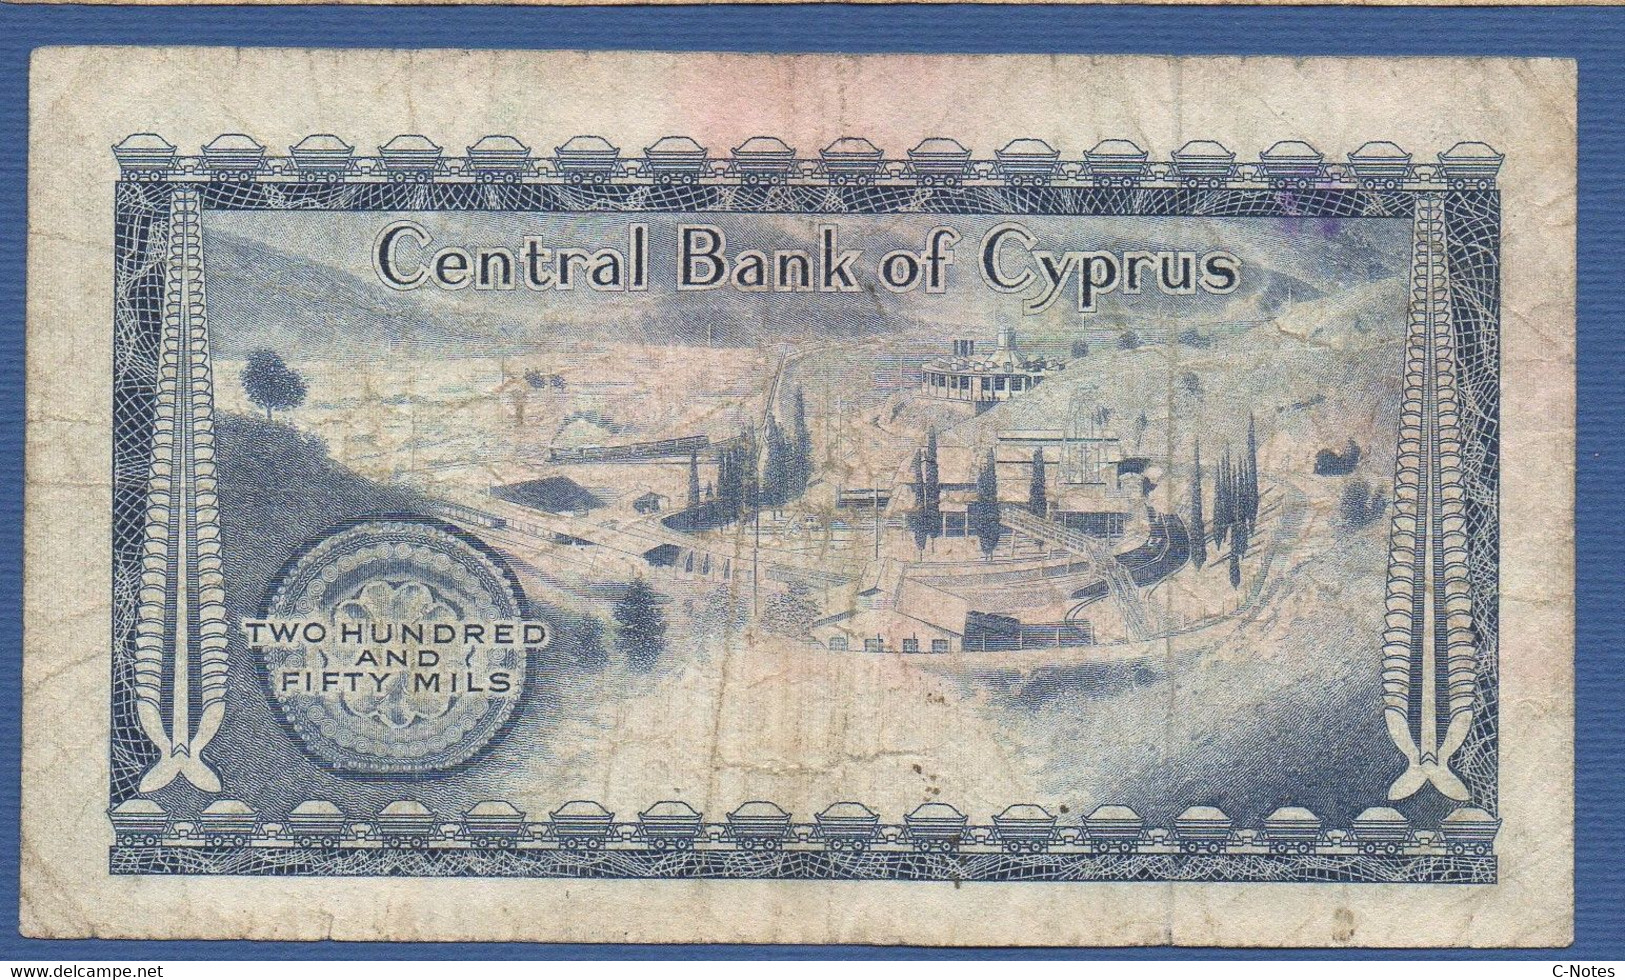 CYPRUS - P.41c – 250 Mils / Mil 01.06.1979 Circulated Serie O/64 172434 - Chypre